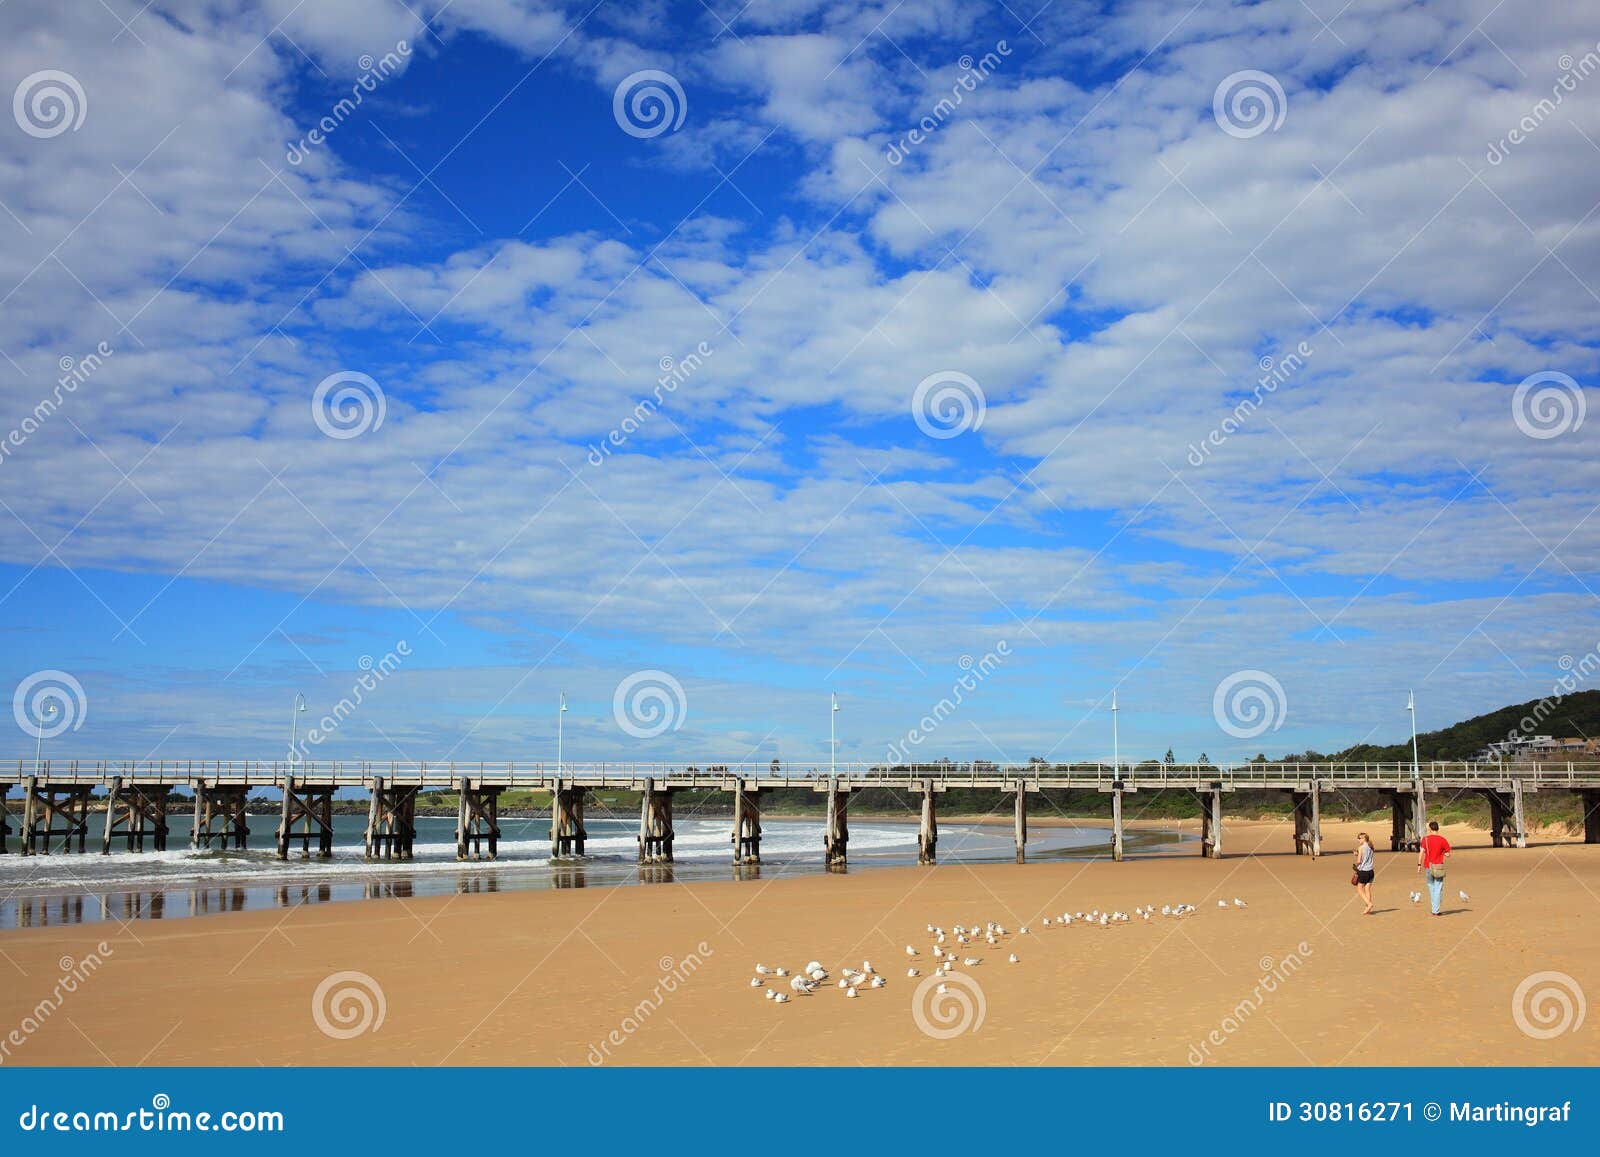 coffs harbour jetty and beach scenery